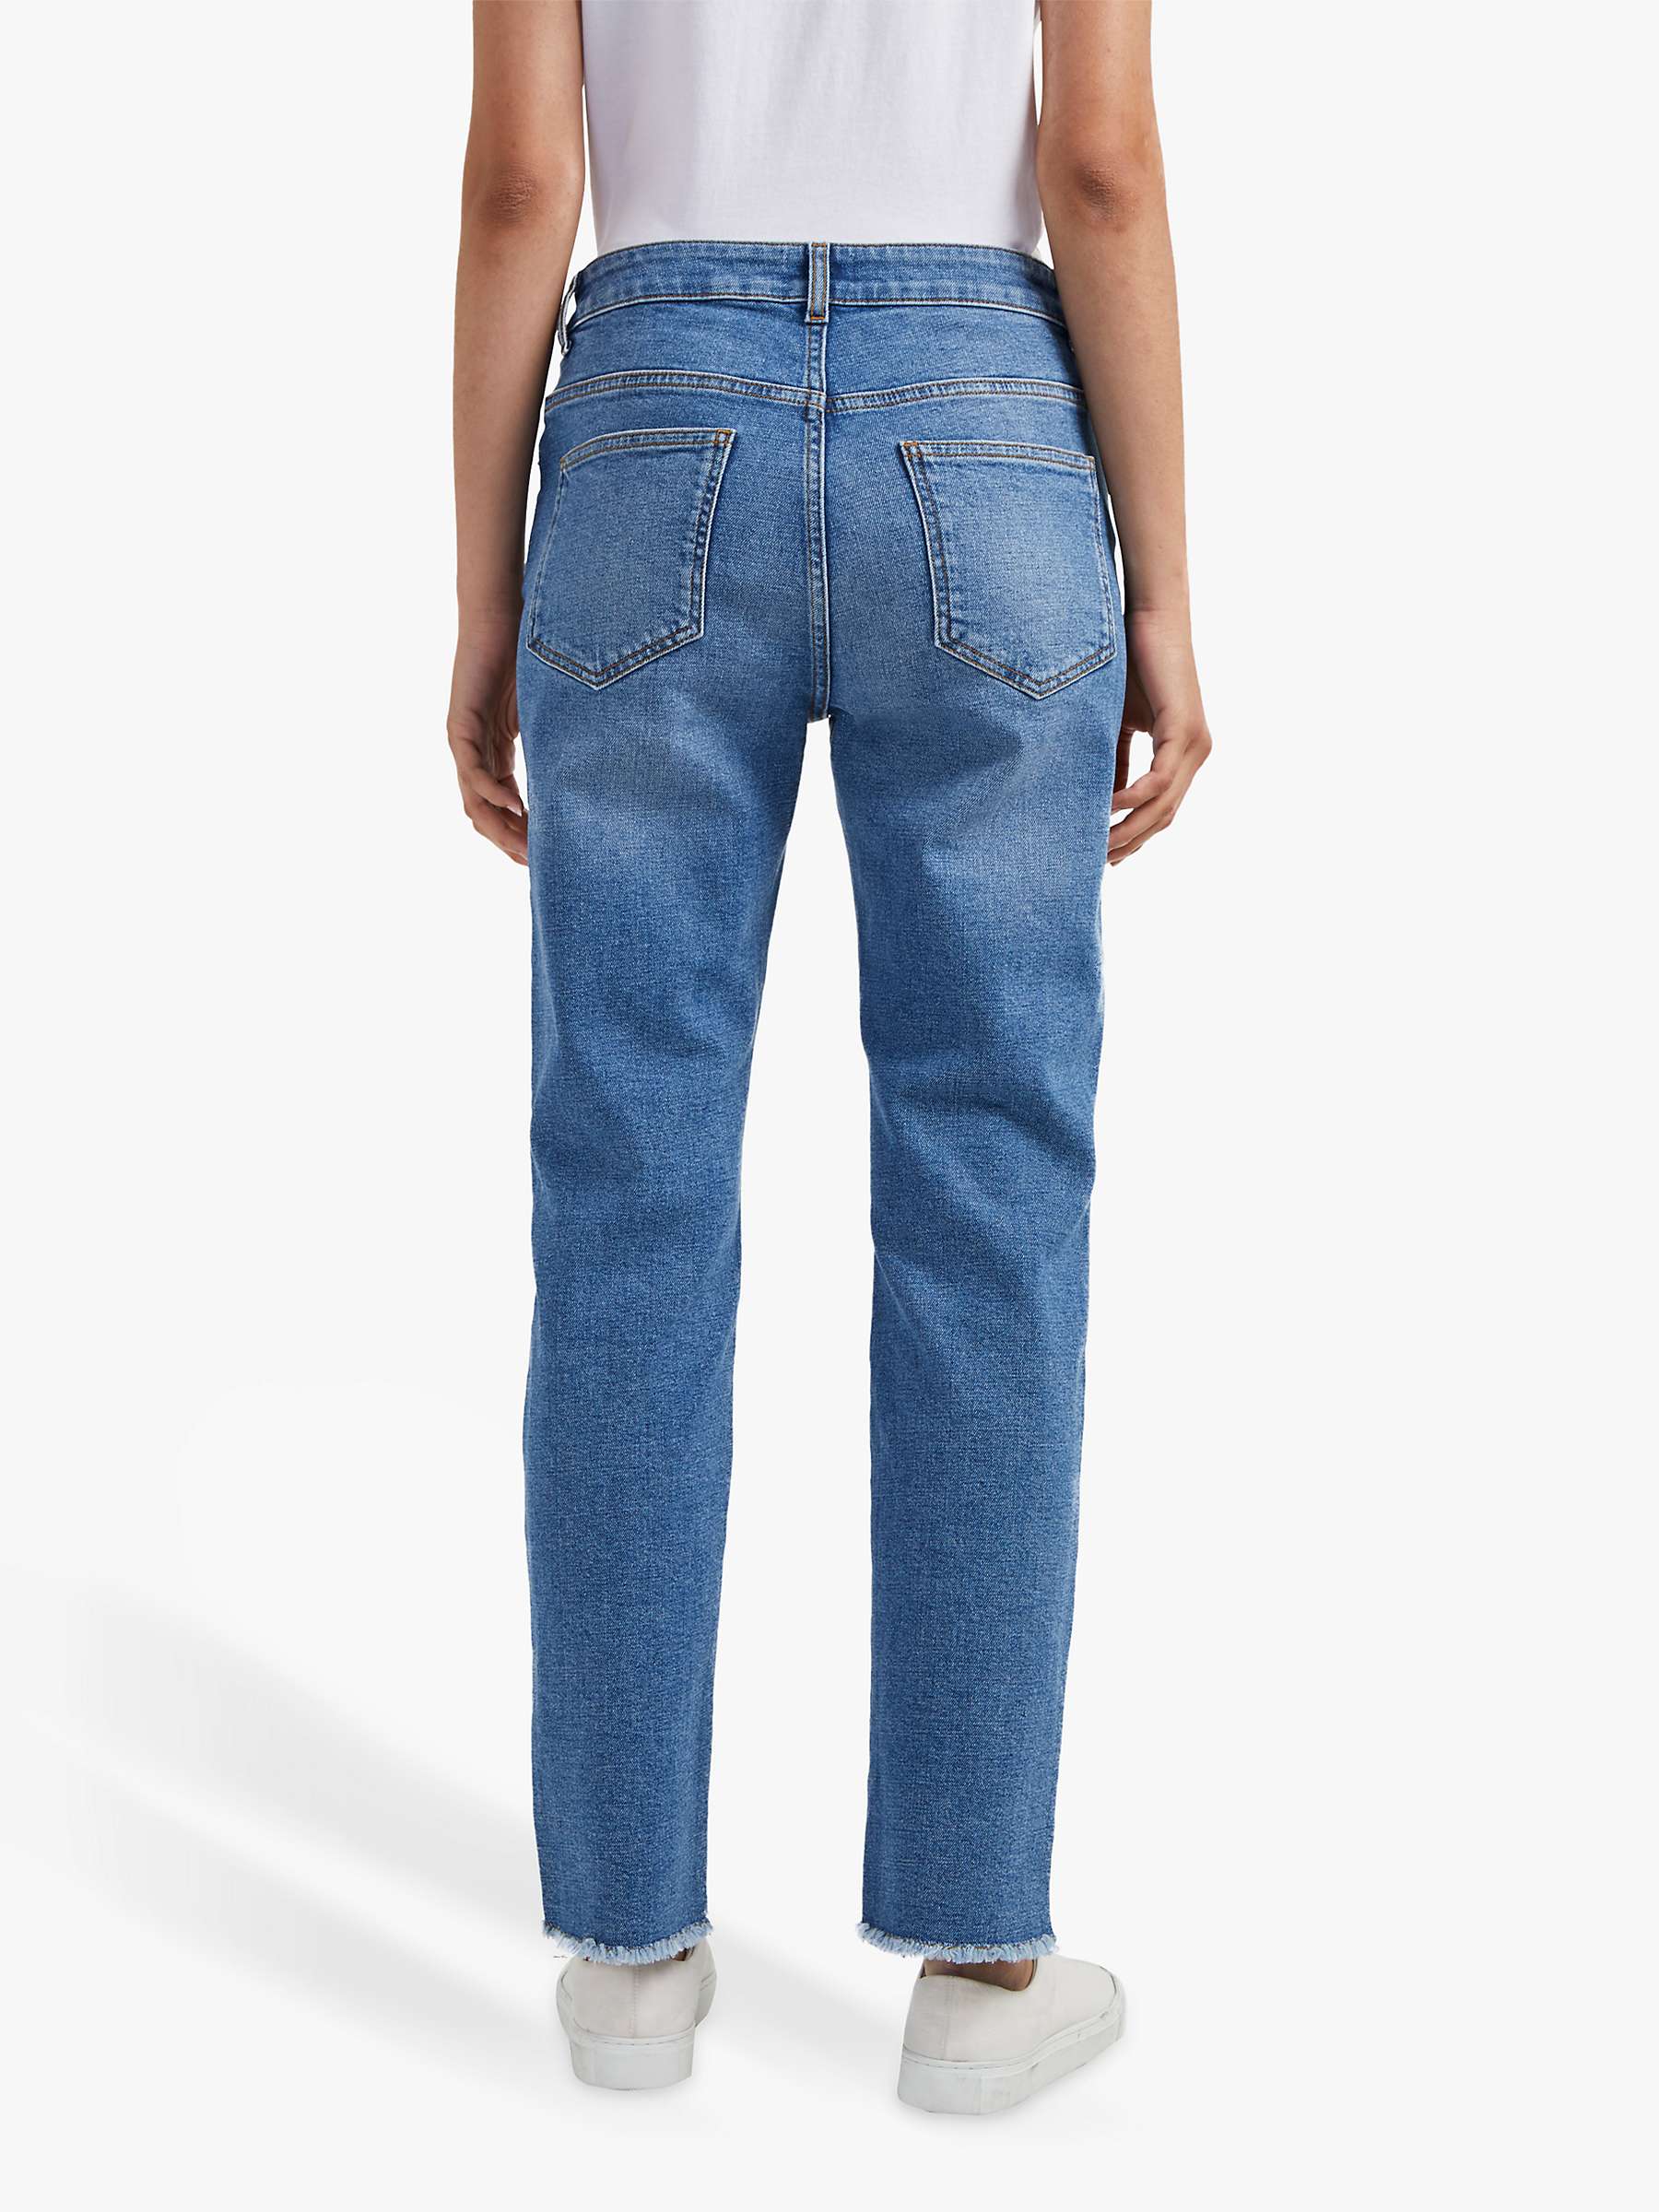 Buy French Connection Jilly Embellished Side Strip Straight Jeans, Blue Online at johnlewis.com